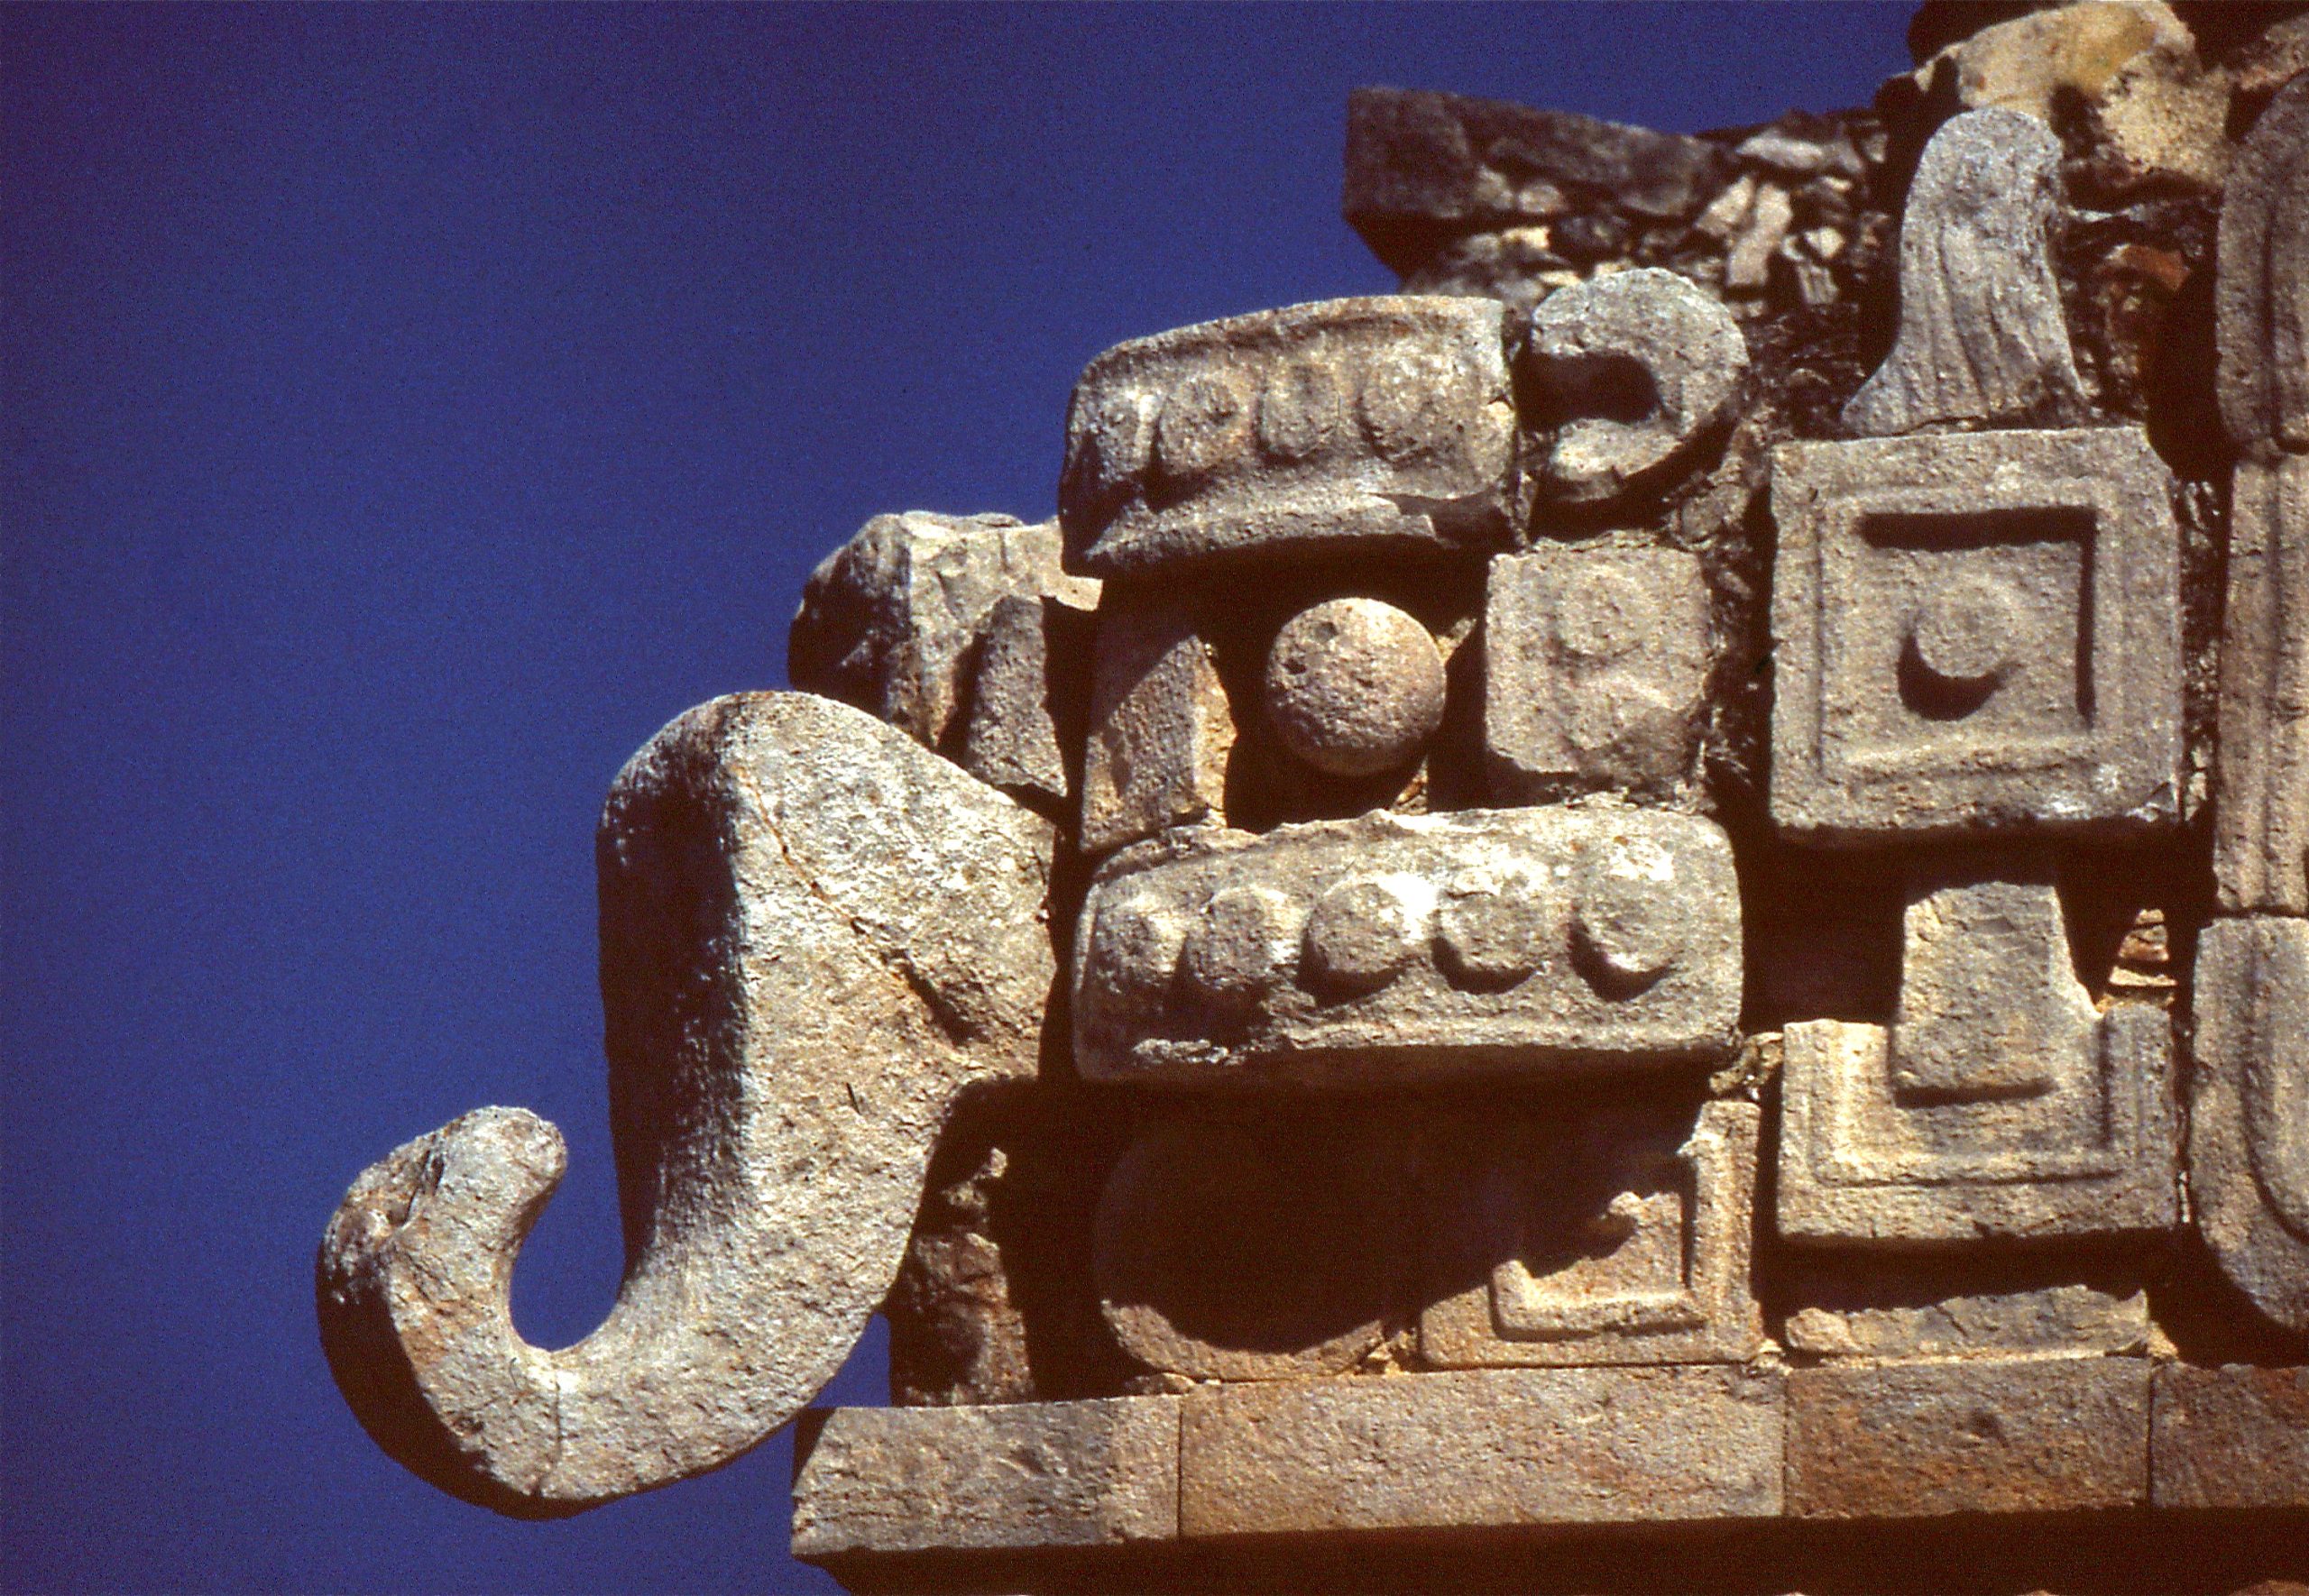 Mayan stone figure with a long elephant-like nose representing a water deity.